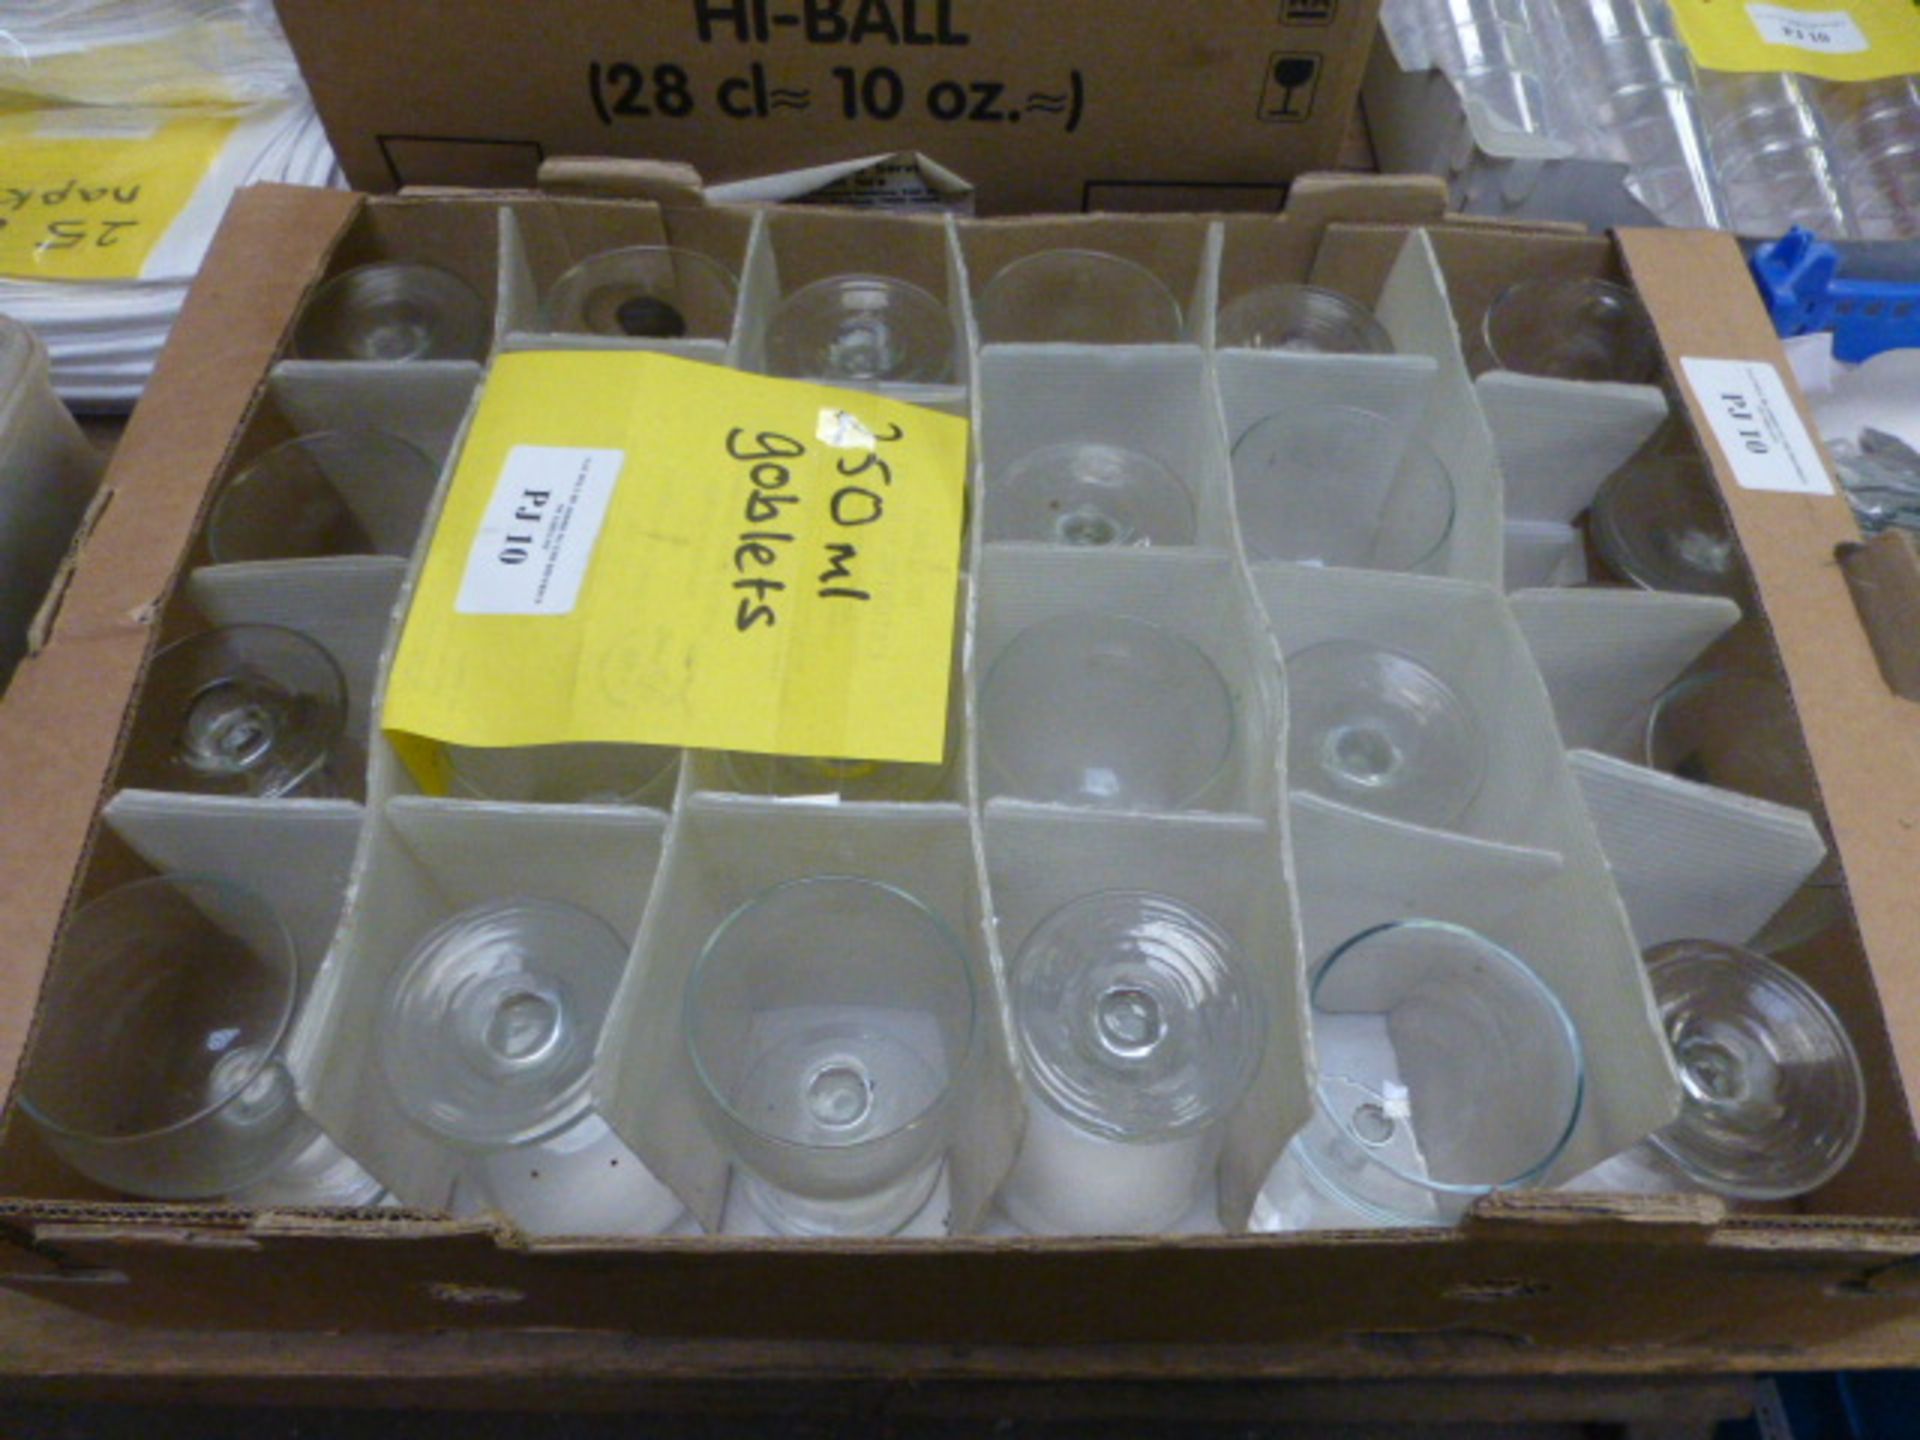 Tray of glass wine goblets